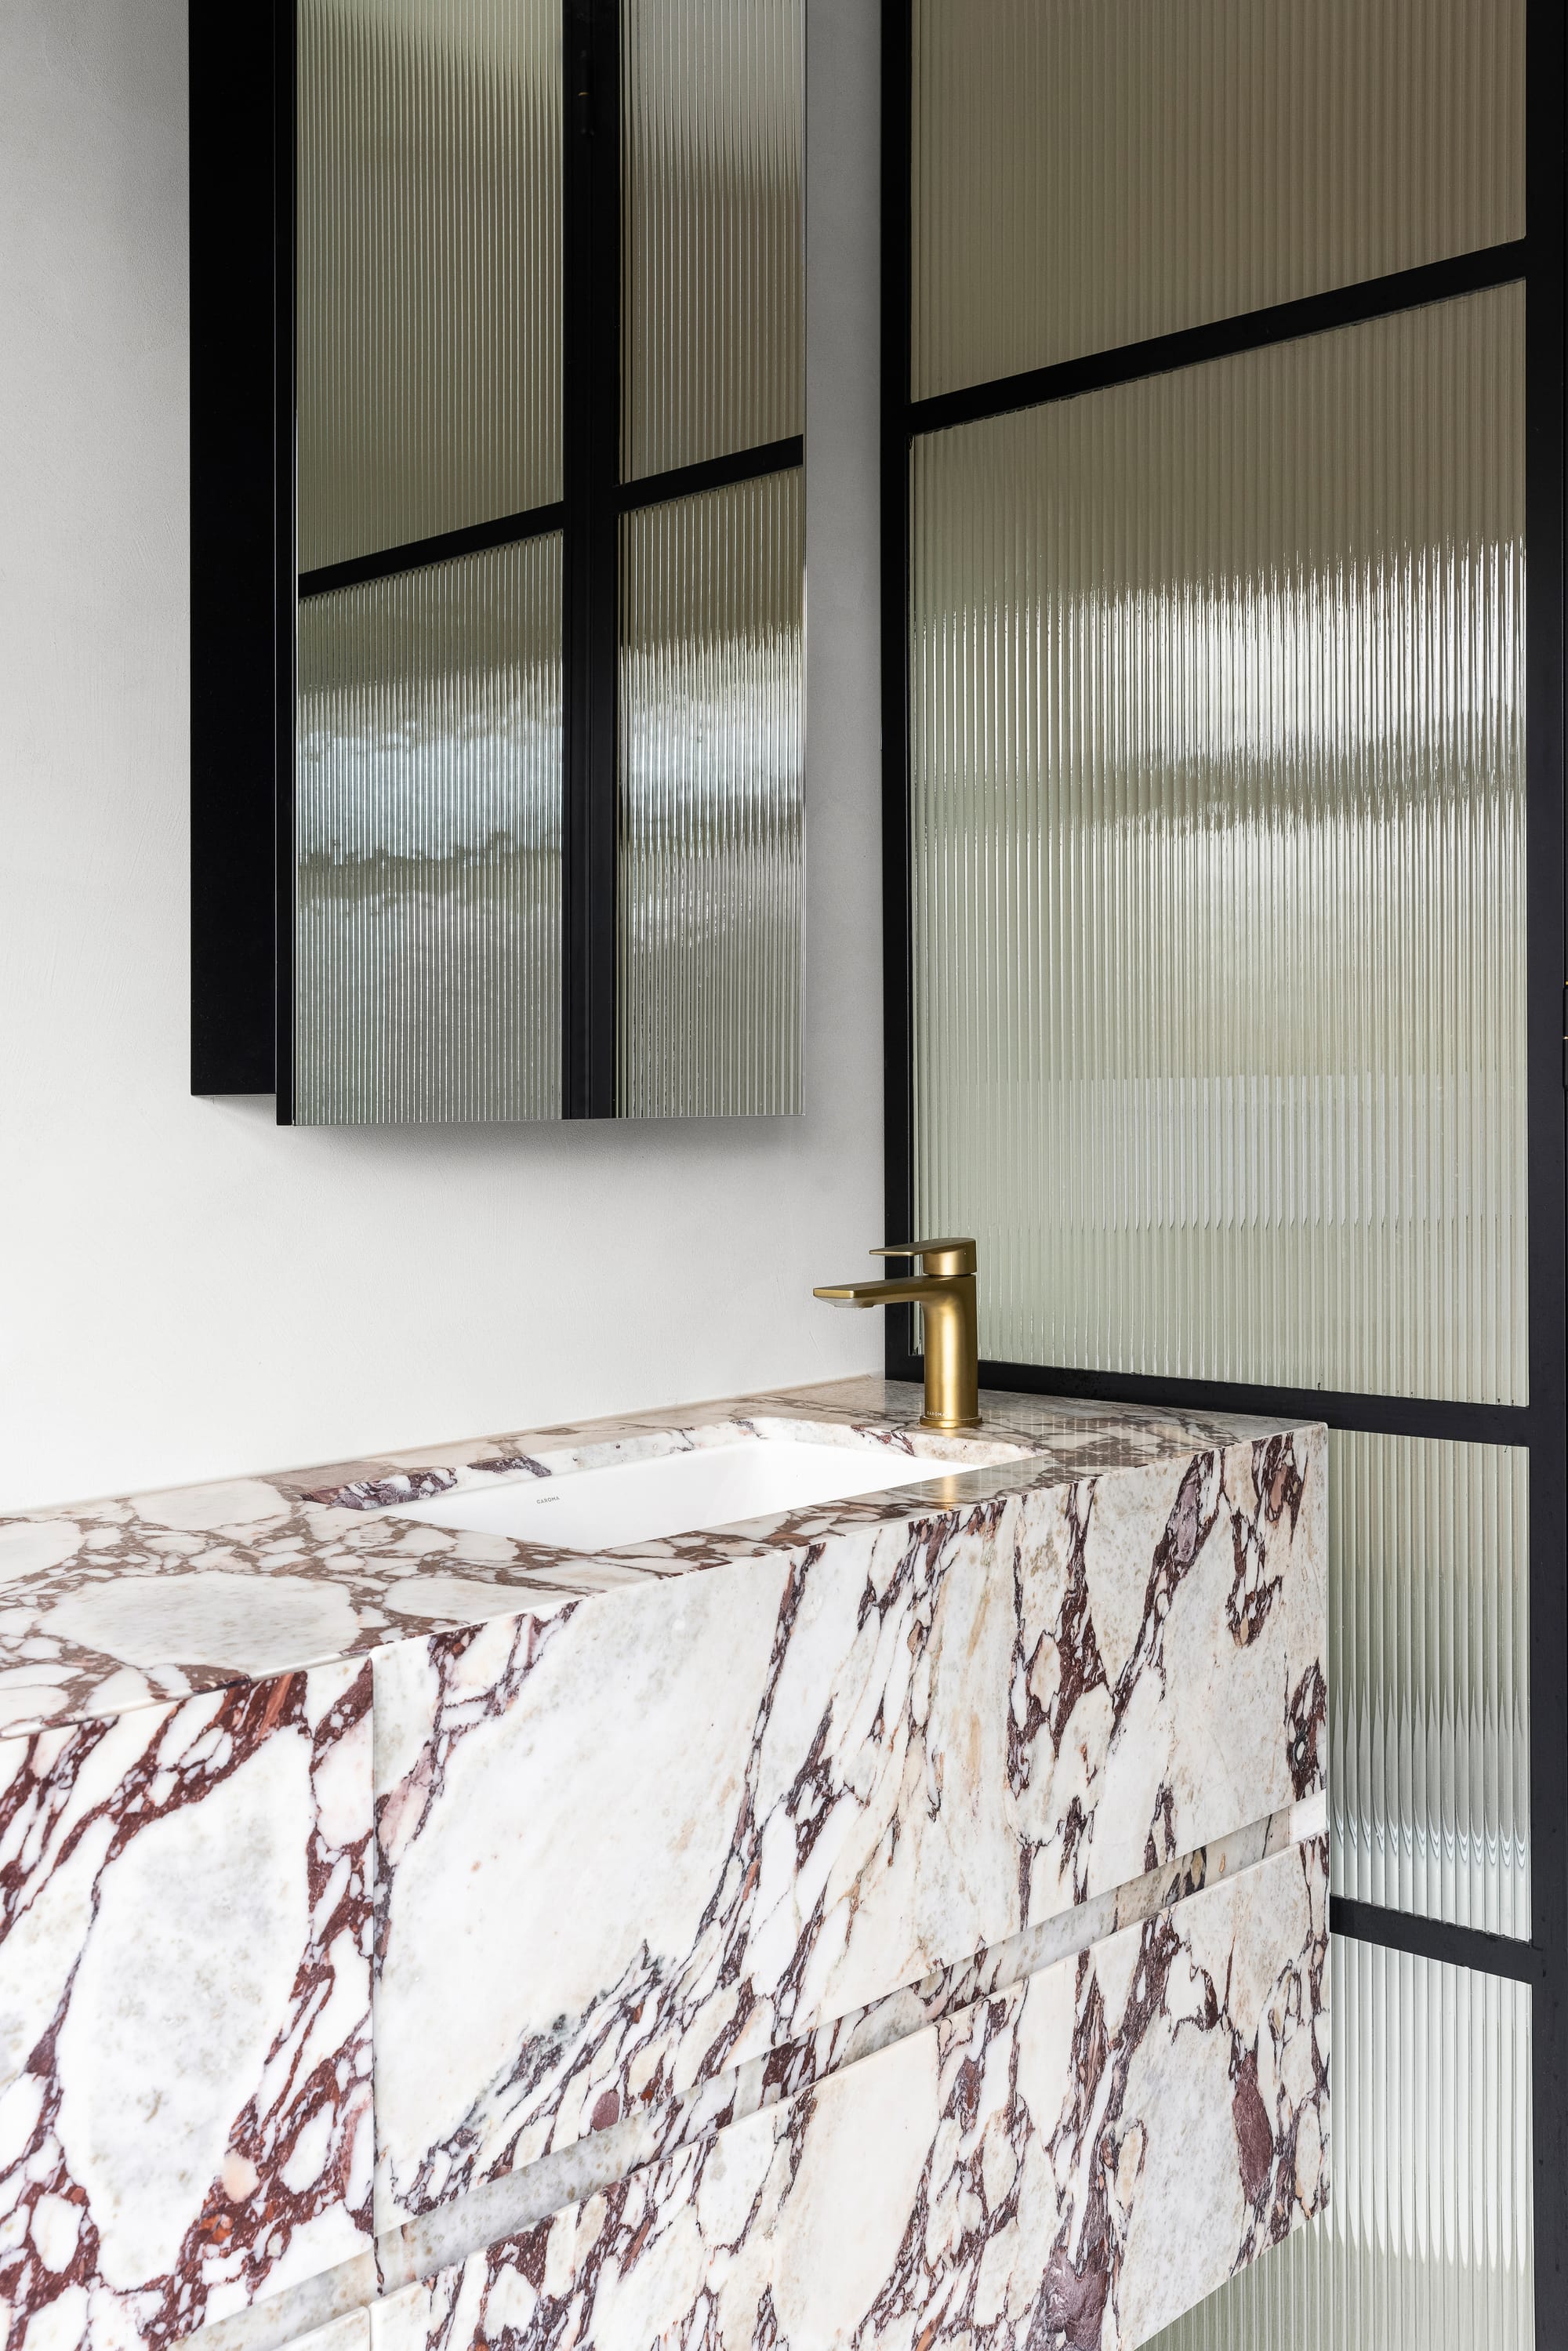 Goldsmith Residence by C.Kairouz Architects. Photography by Spacecraft. White and brown marbled bathroom sink and cabinet with gold tapware. Fluted glass screen with black frame. Black framed mirror above sink. 